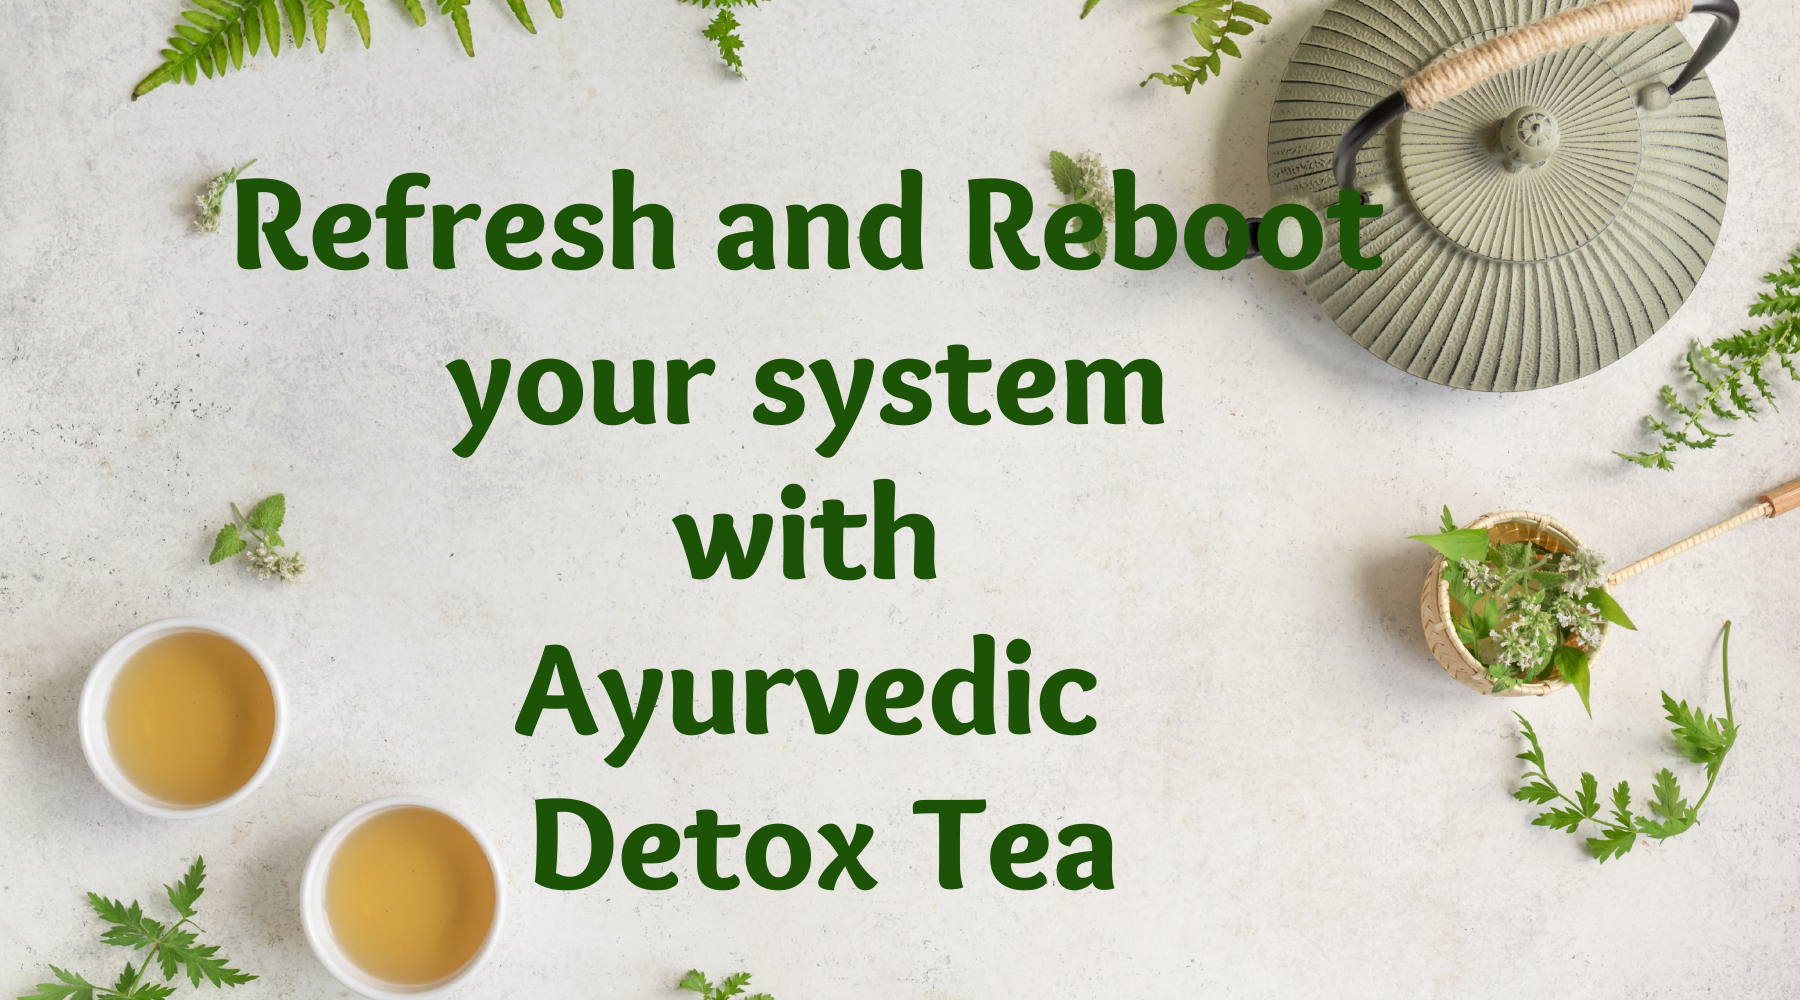 This Ayurvedic Detox Tea will refresh and reboot your body